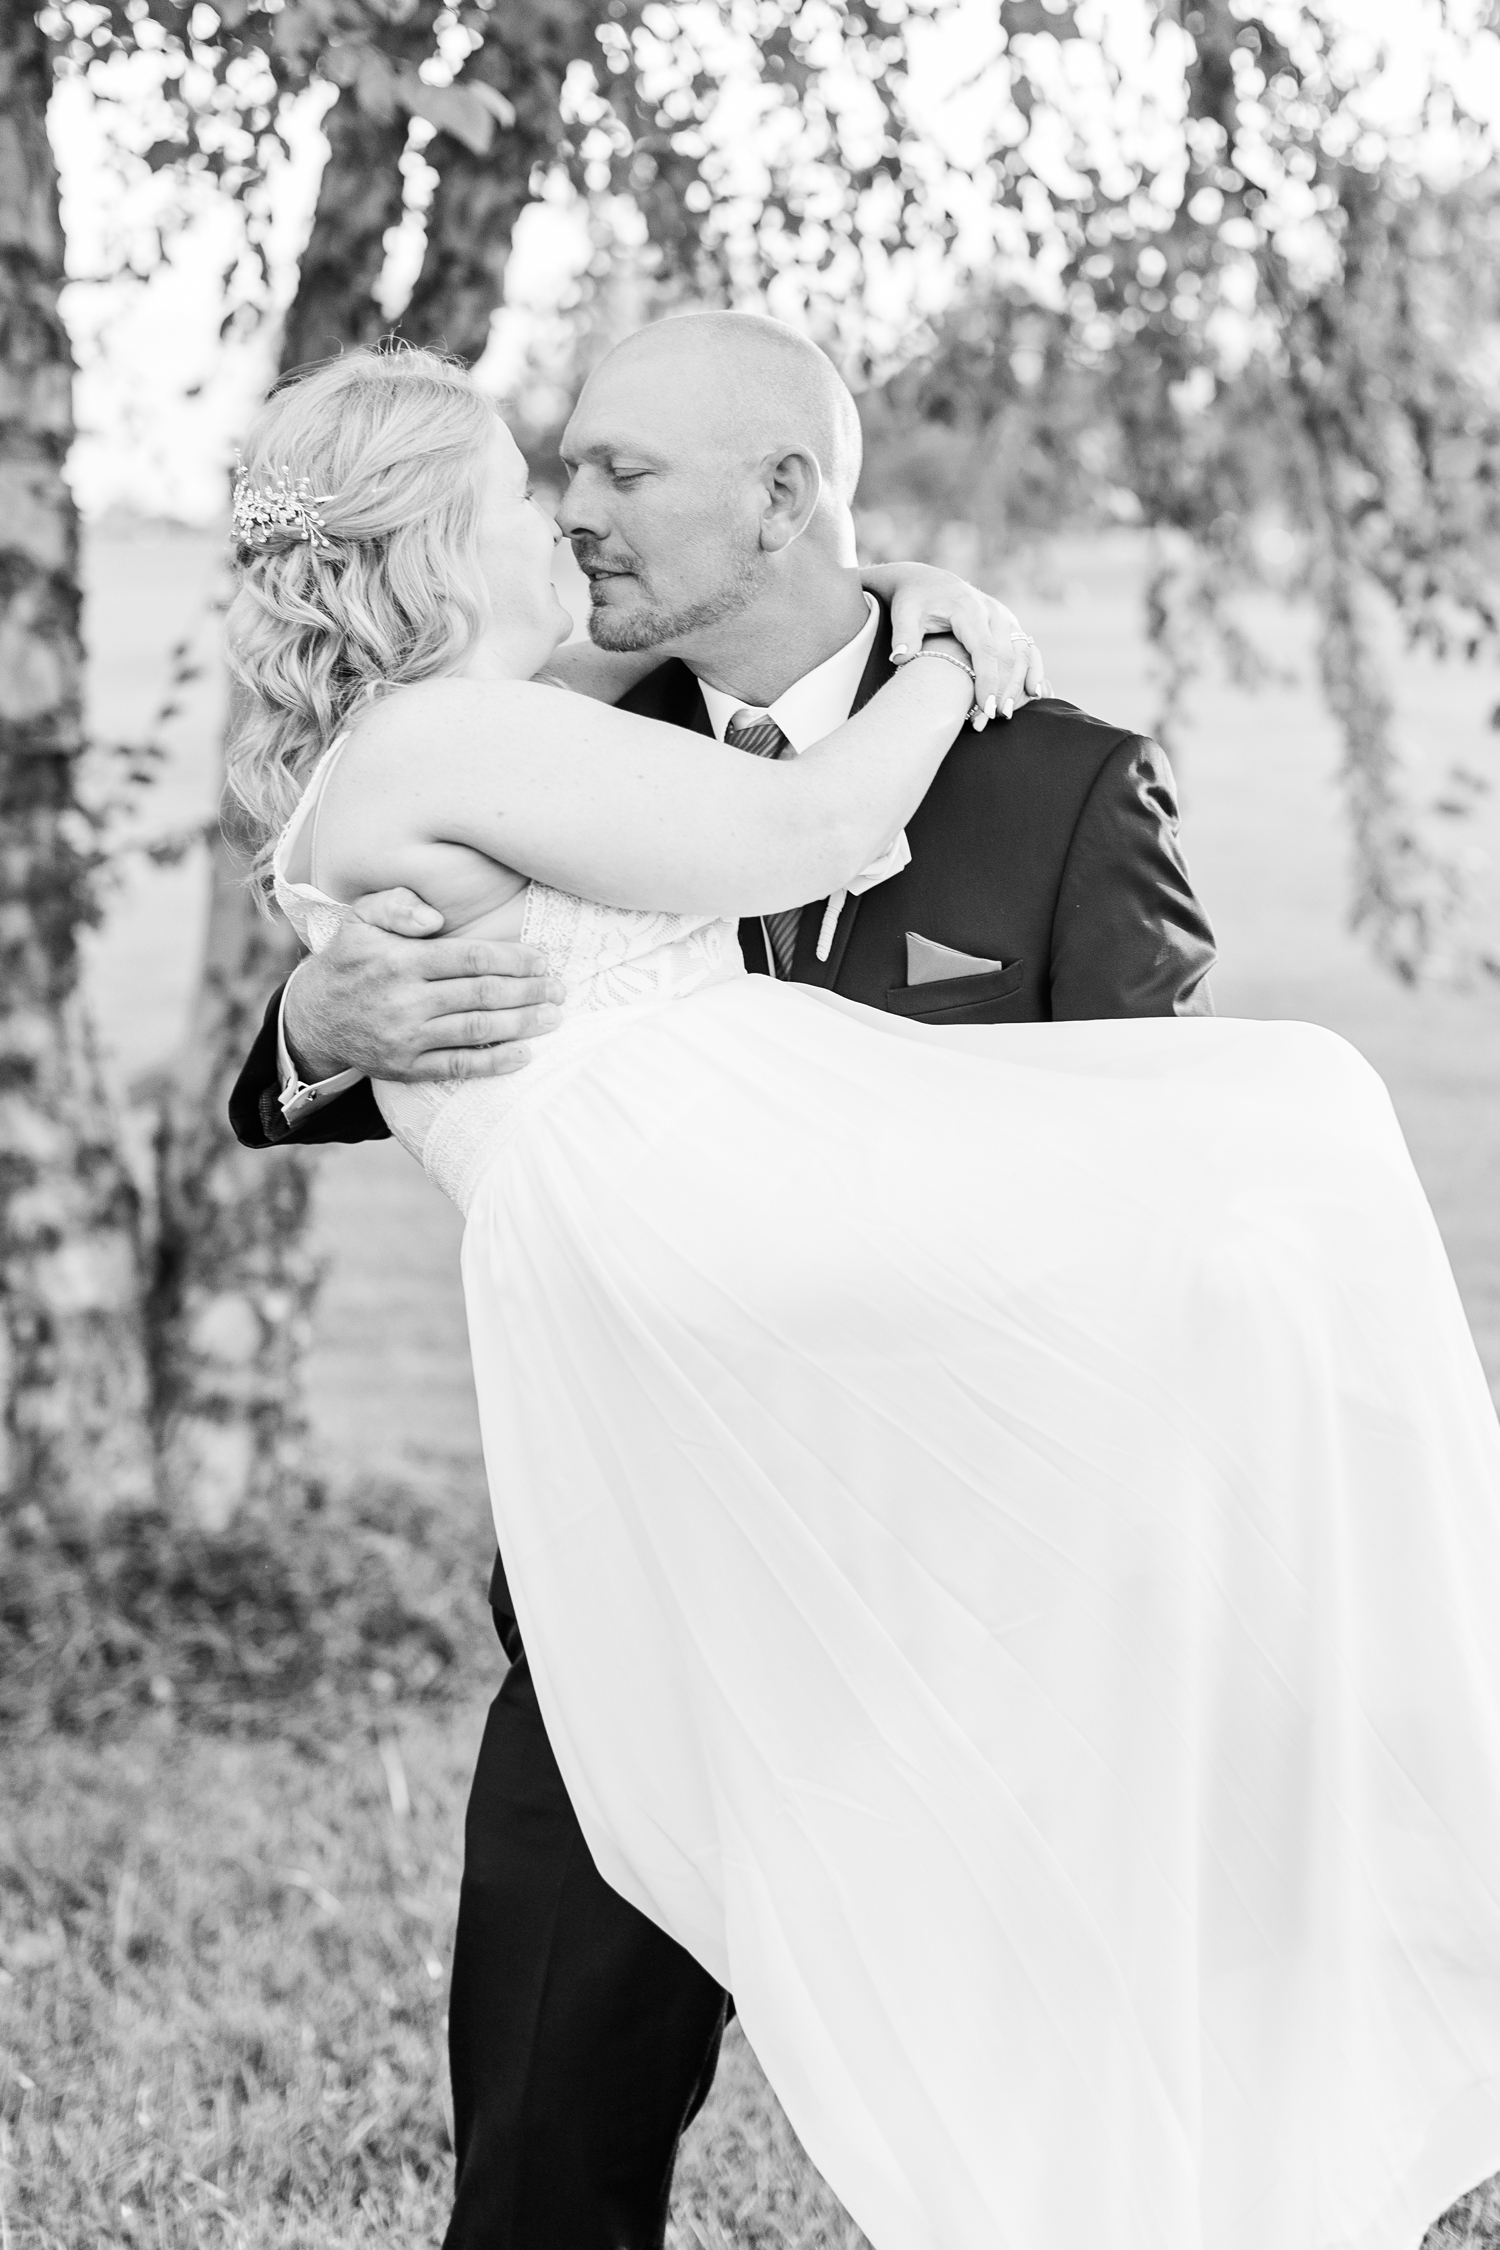 James carries his bride during sunset at the Opera House in Fort Dodge | CB Studio